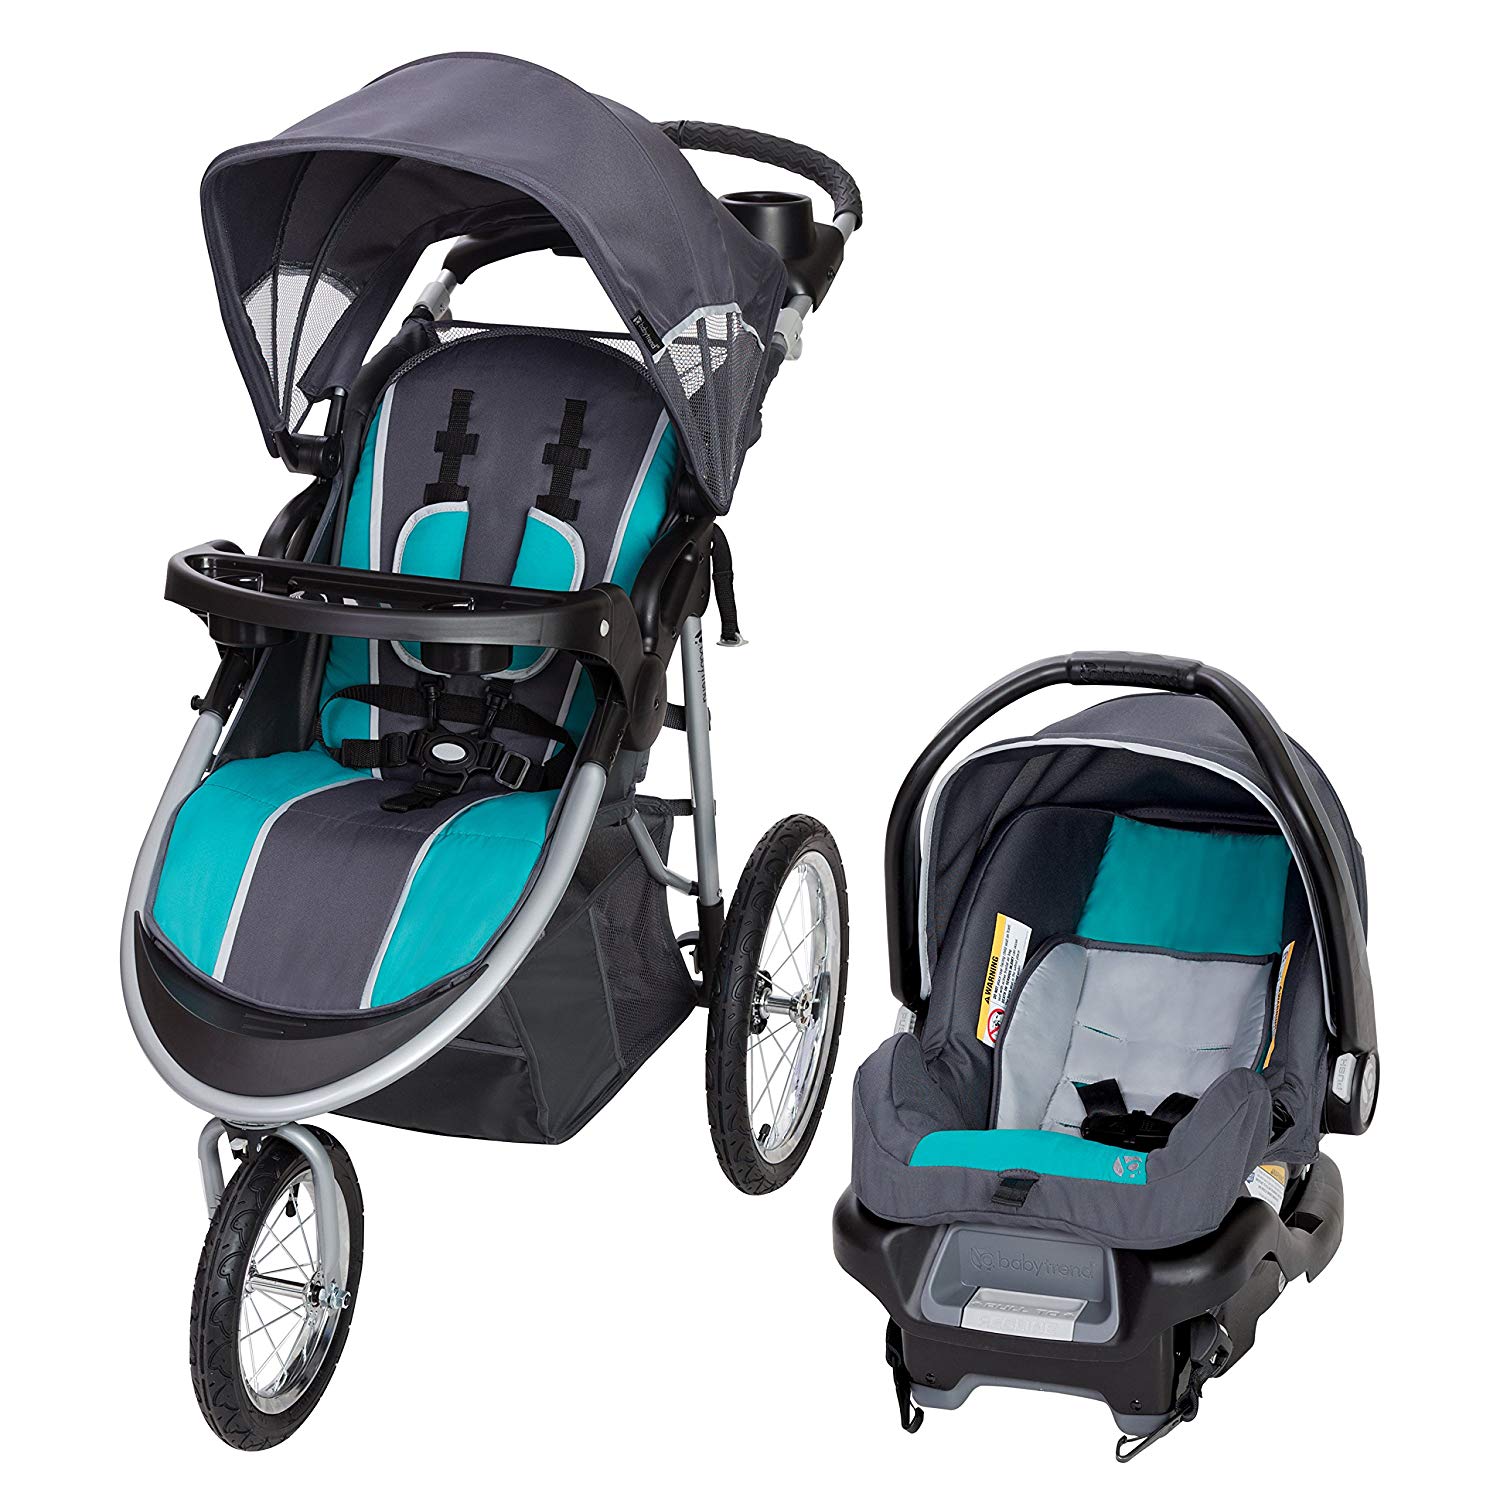 Baby Trend Pathway 35 Jogger Travel System, Optic Teal—$108.00!